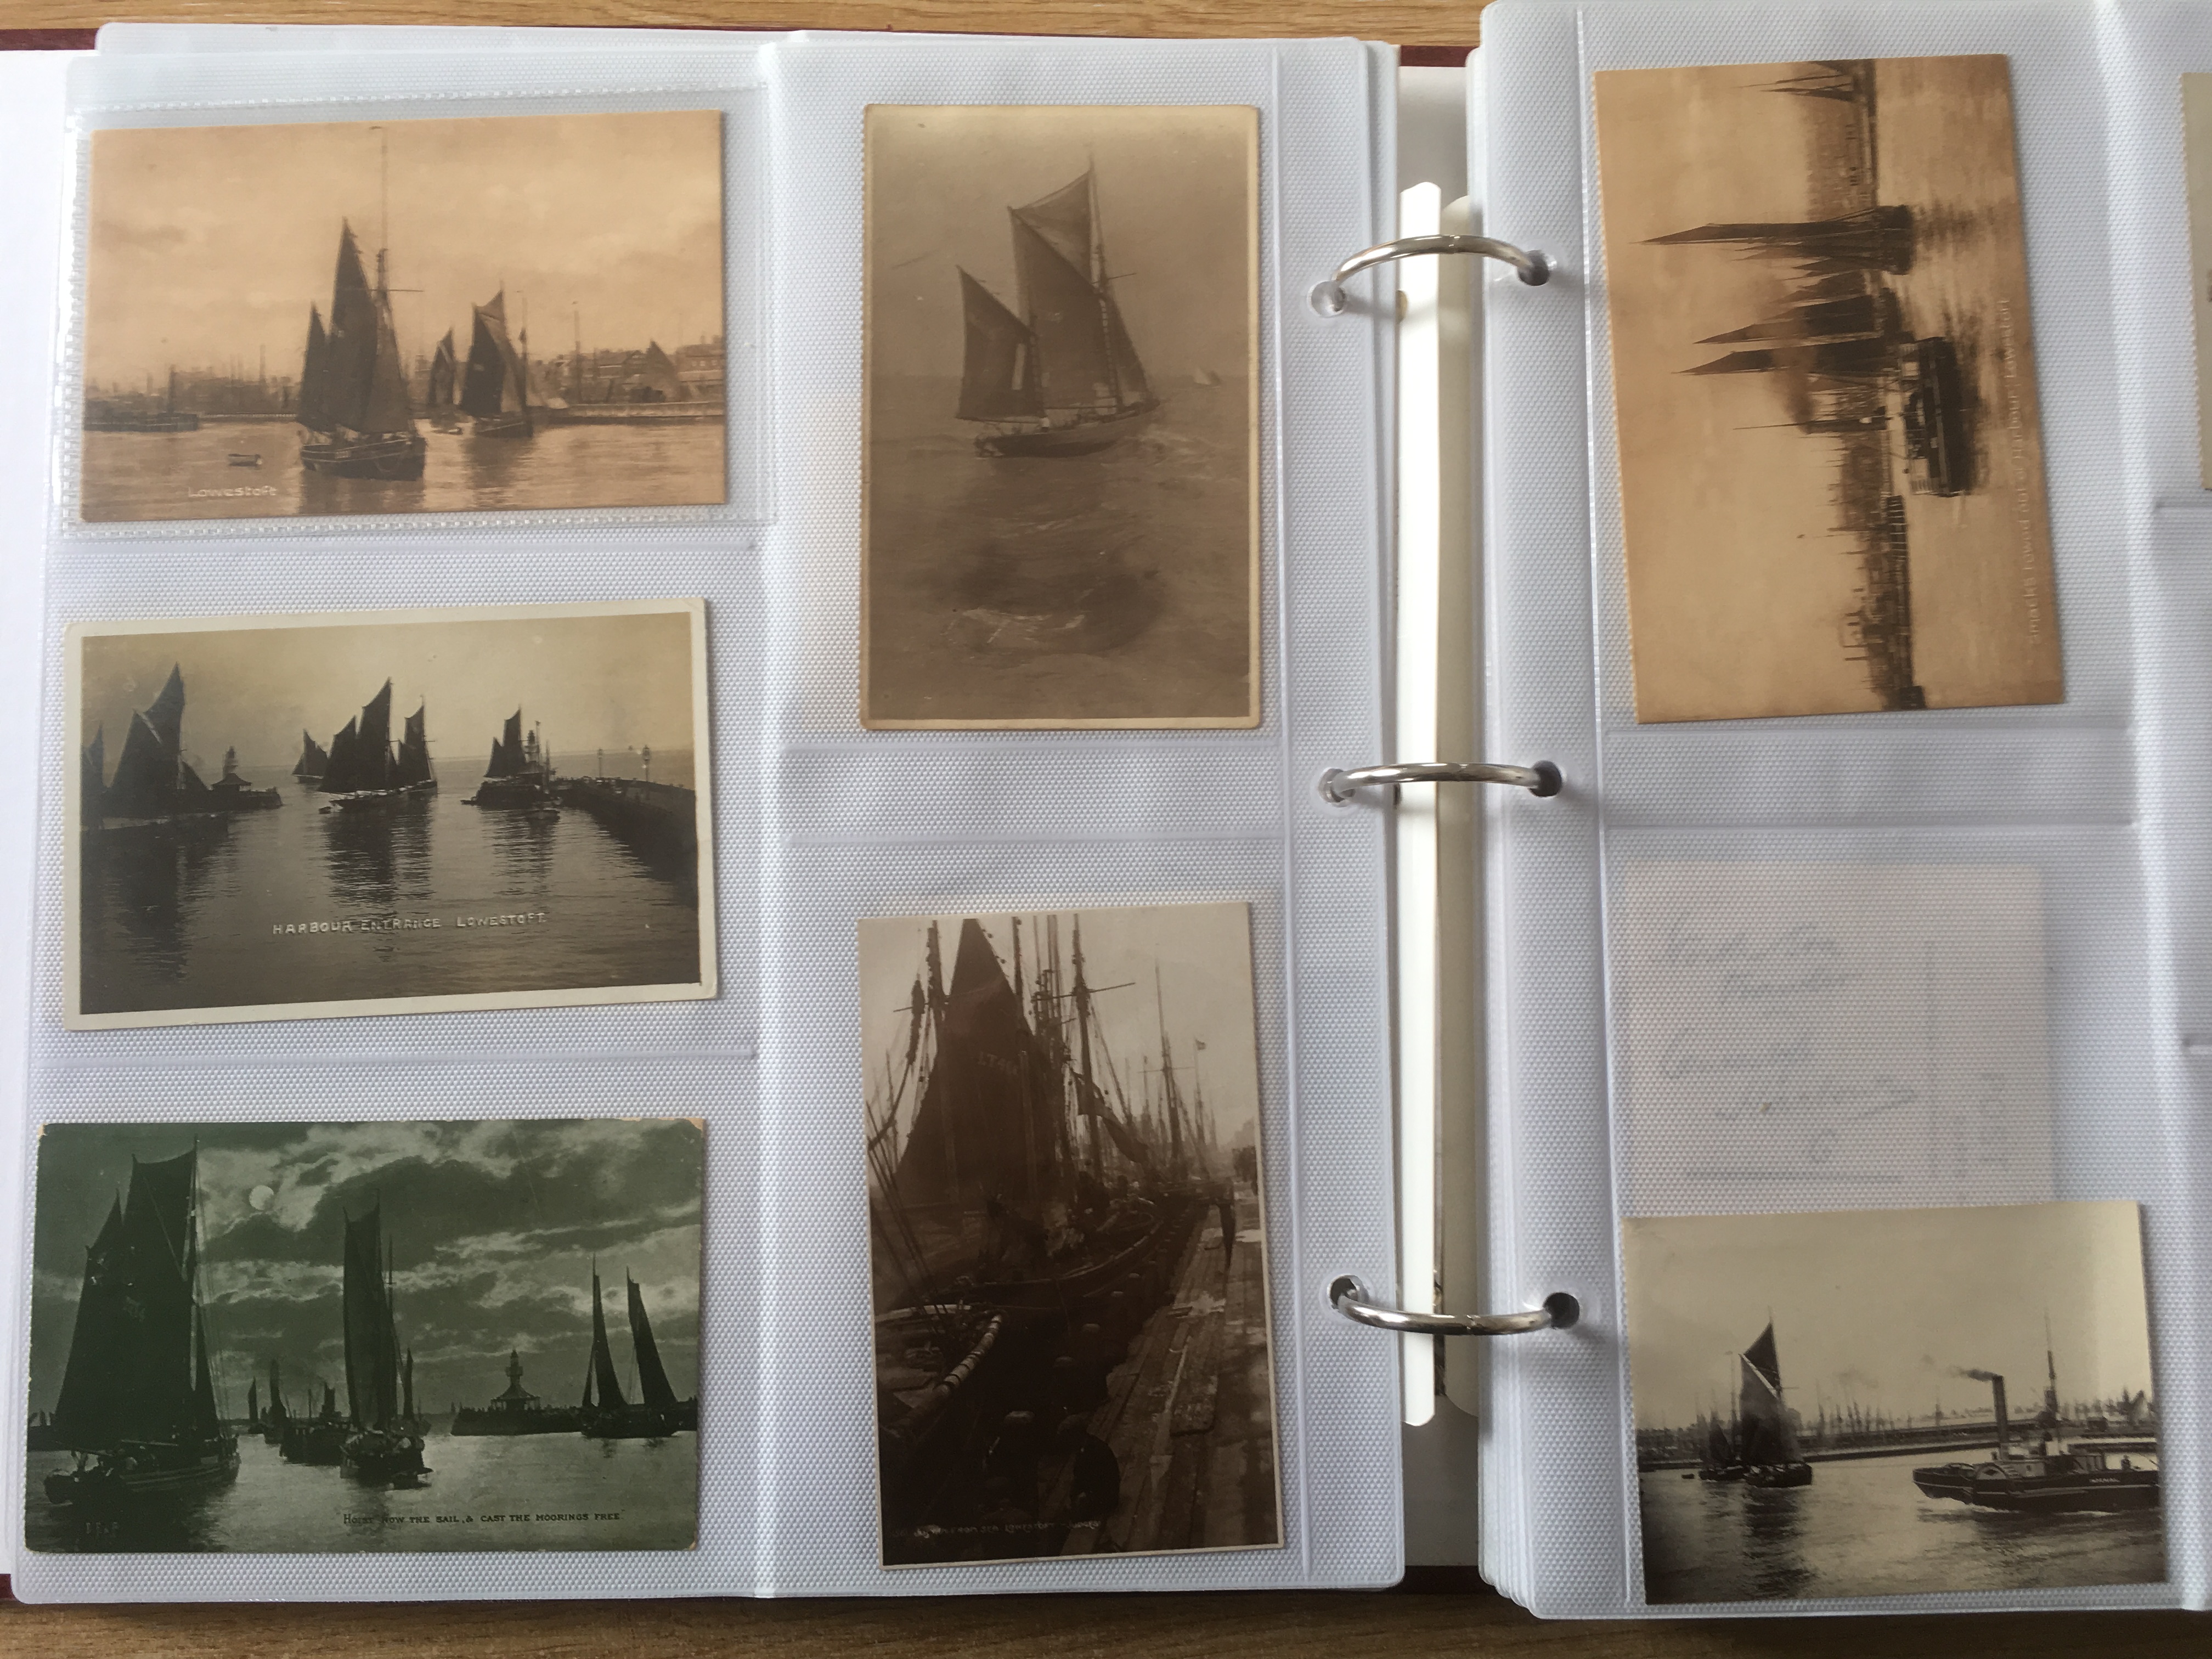 SUFFOLK: ALBUM WITH A COLLECTION OF LOWESTOFT FISHING INDUSTRY POSTCARDS AND A FEW PHOTOS. - Image 5 of 8